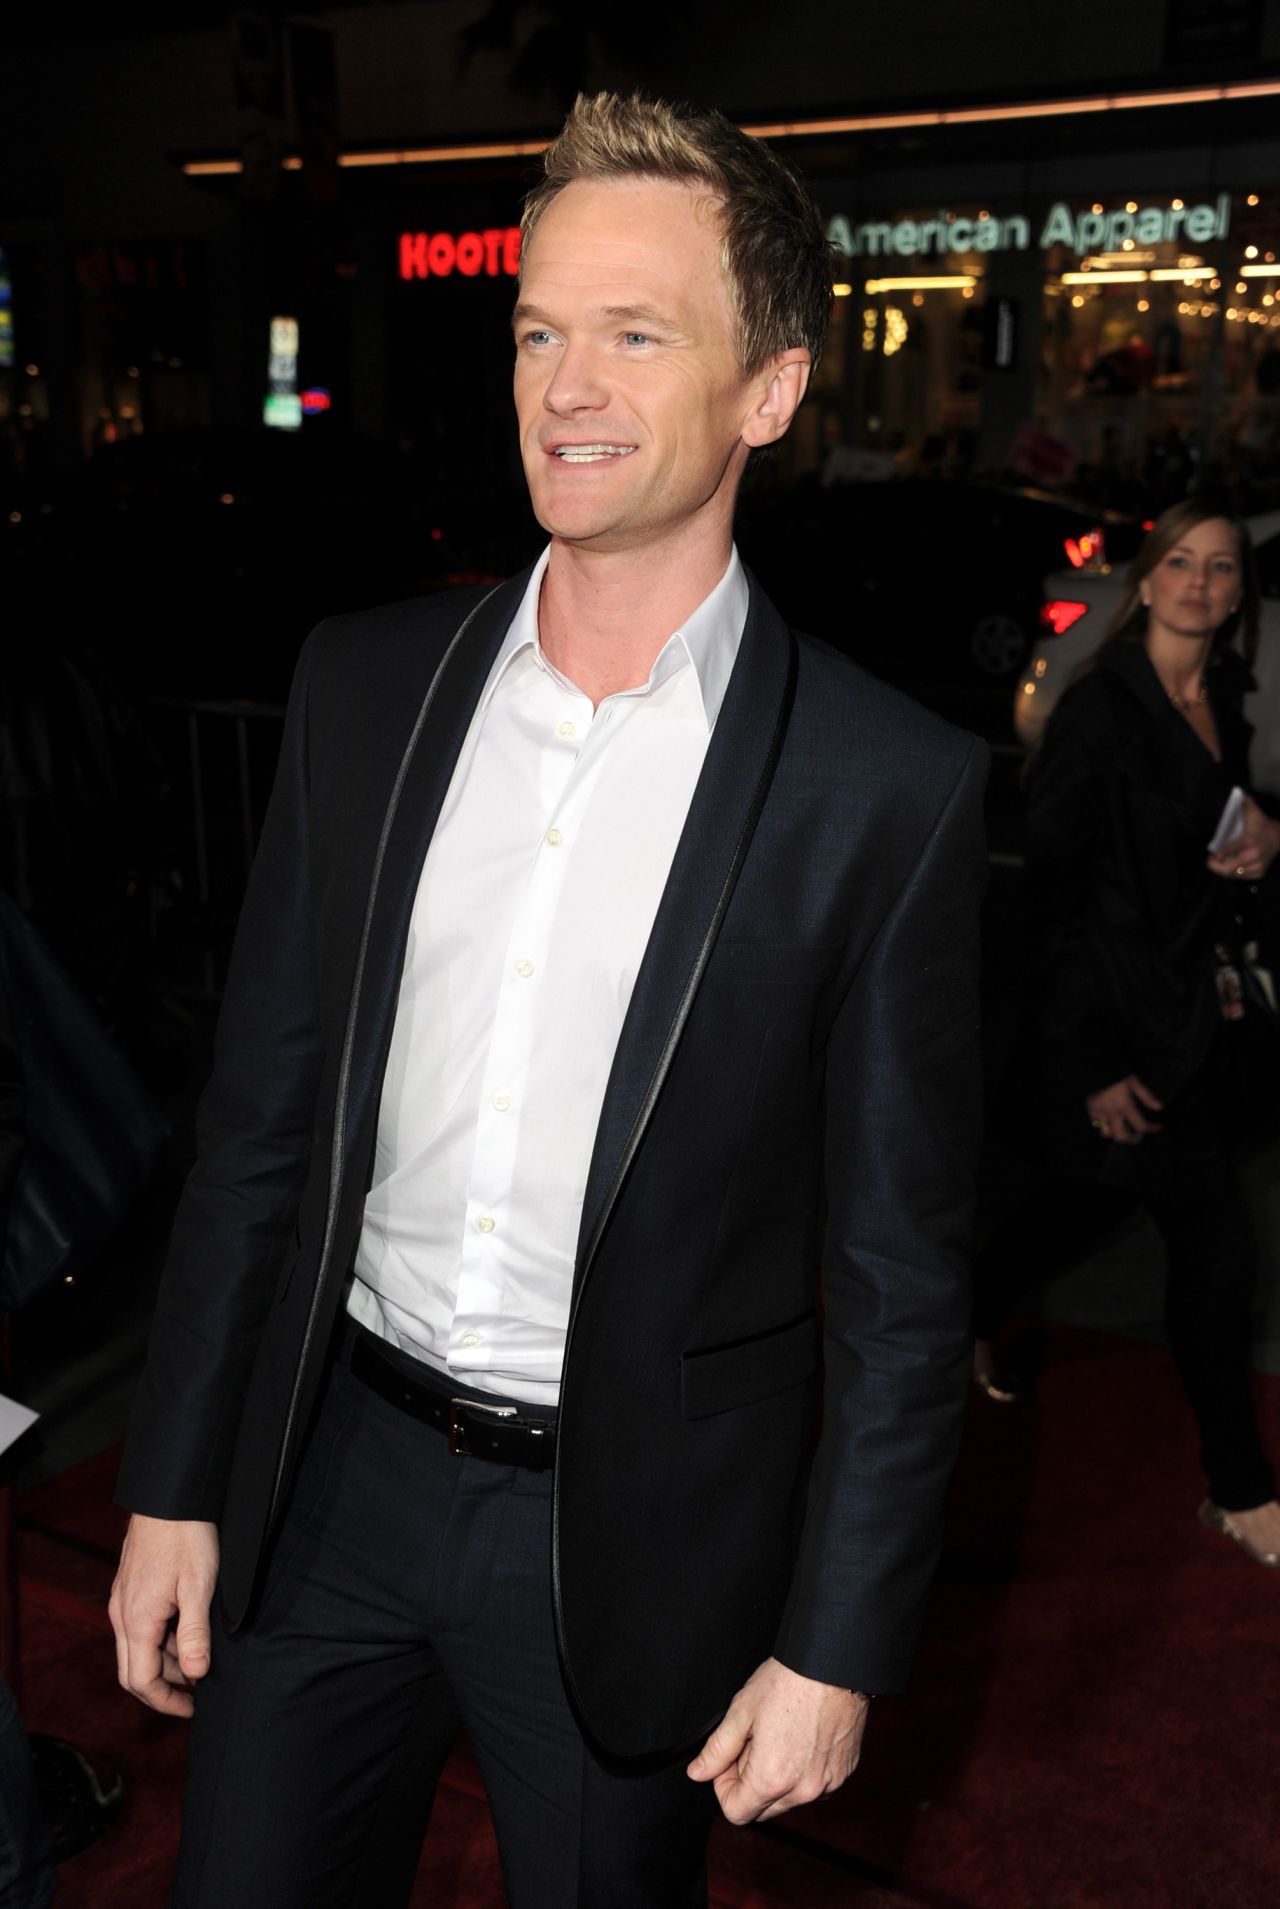 Once known best as the TV character he played during childhood, Doogie Howser, Neil Patrick Harris has continued his successful acting career as an adult. Harris often walks the red carpet with partner David Burtka and starred in the hit sitcom "How I Met Your Mother." He told People magazine in 2006 that he is, in fact, gay. "I am happy to dispel any rumors or misconceptions and am quite proud to say that I am a very content gay man."